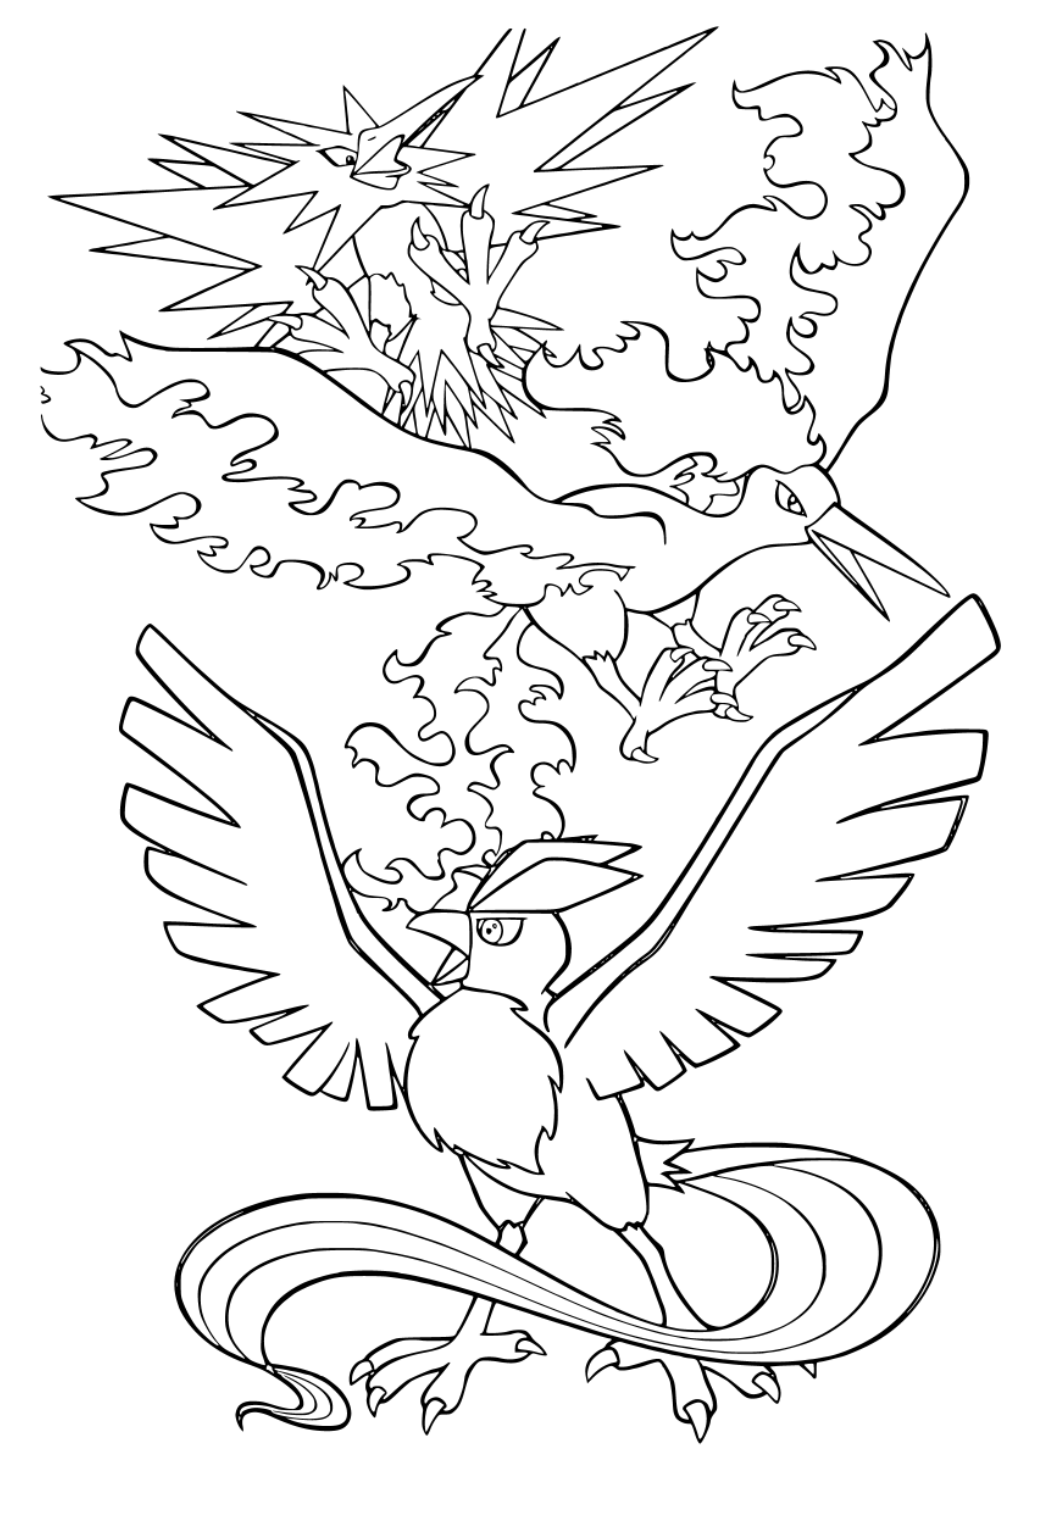 Free printable legendary pokemon wings coloring page for adults and kids